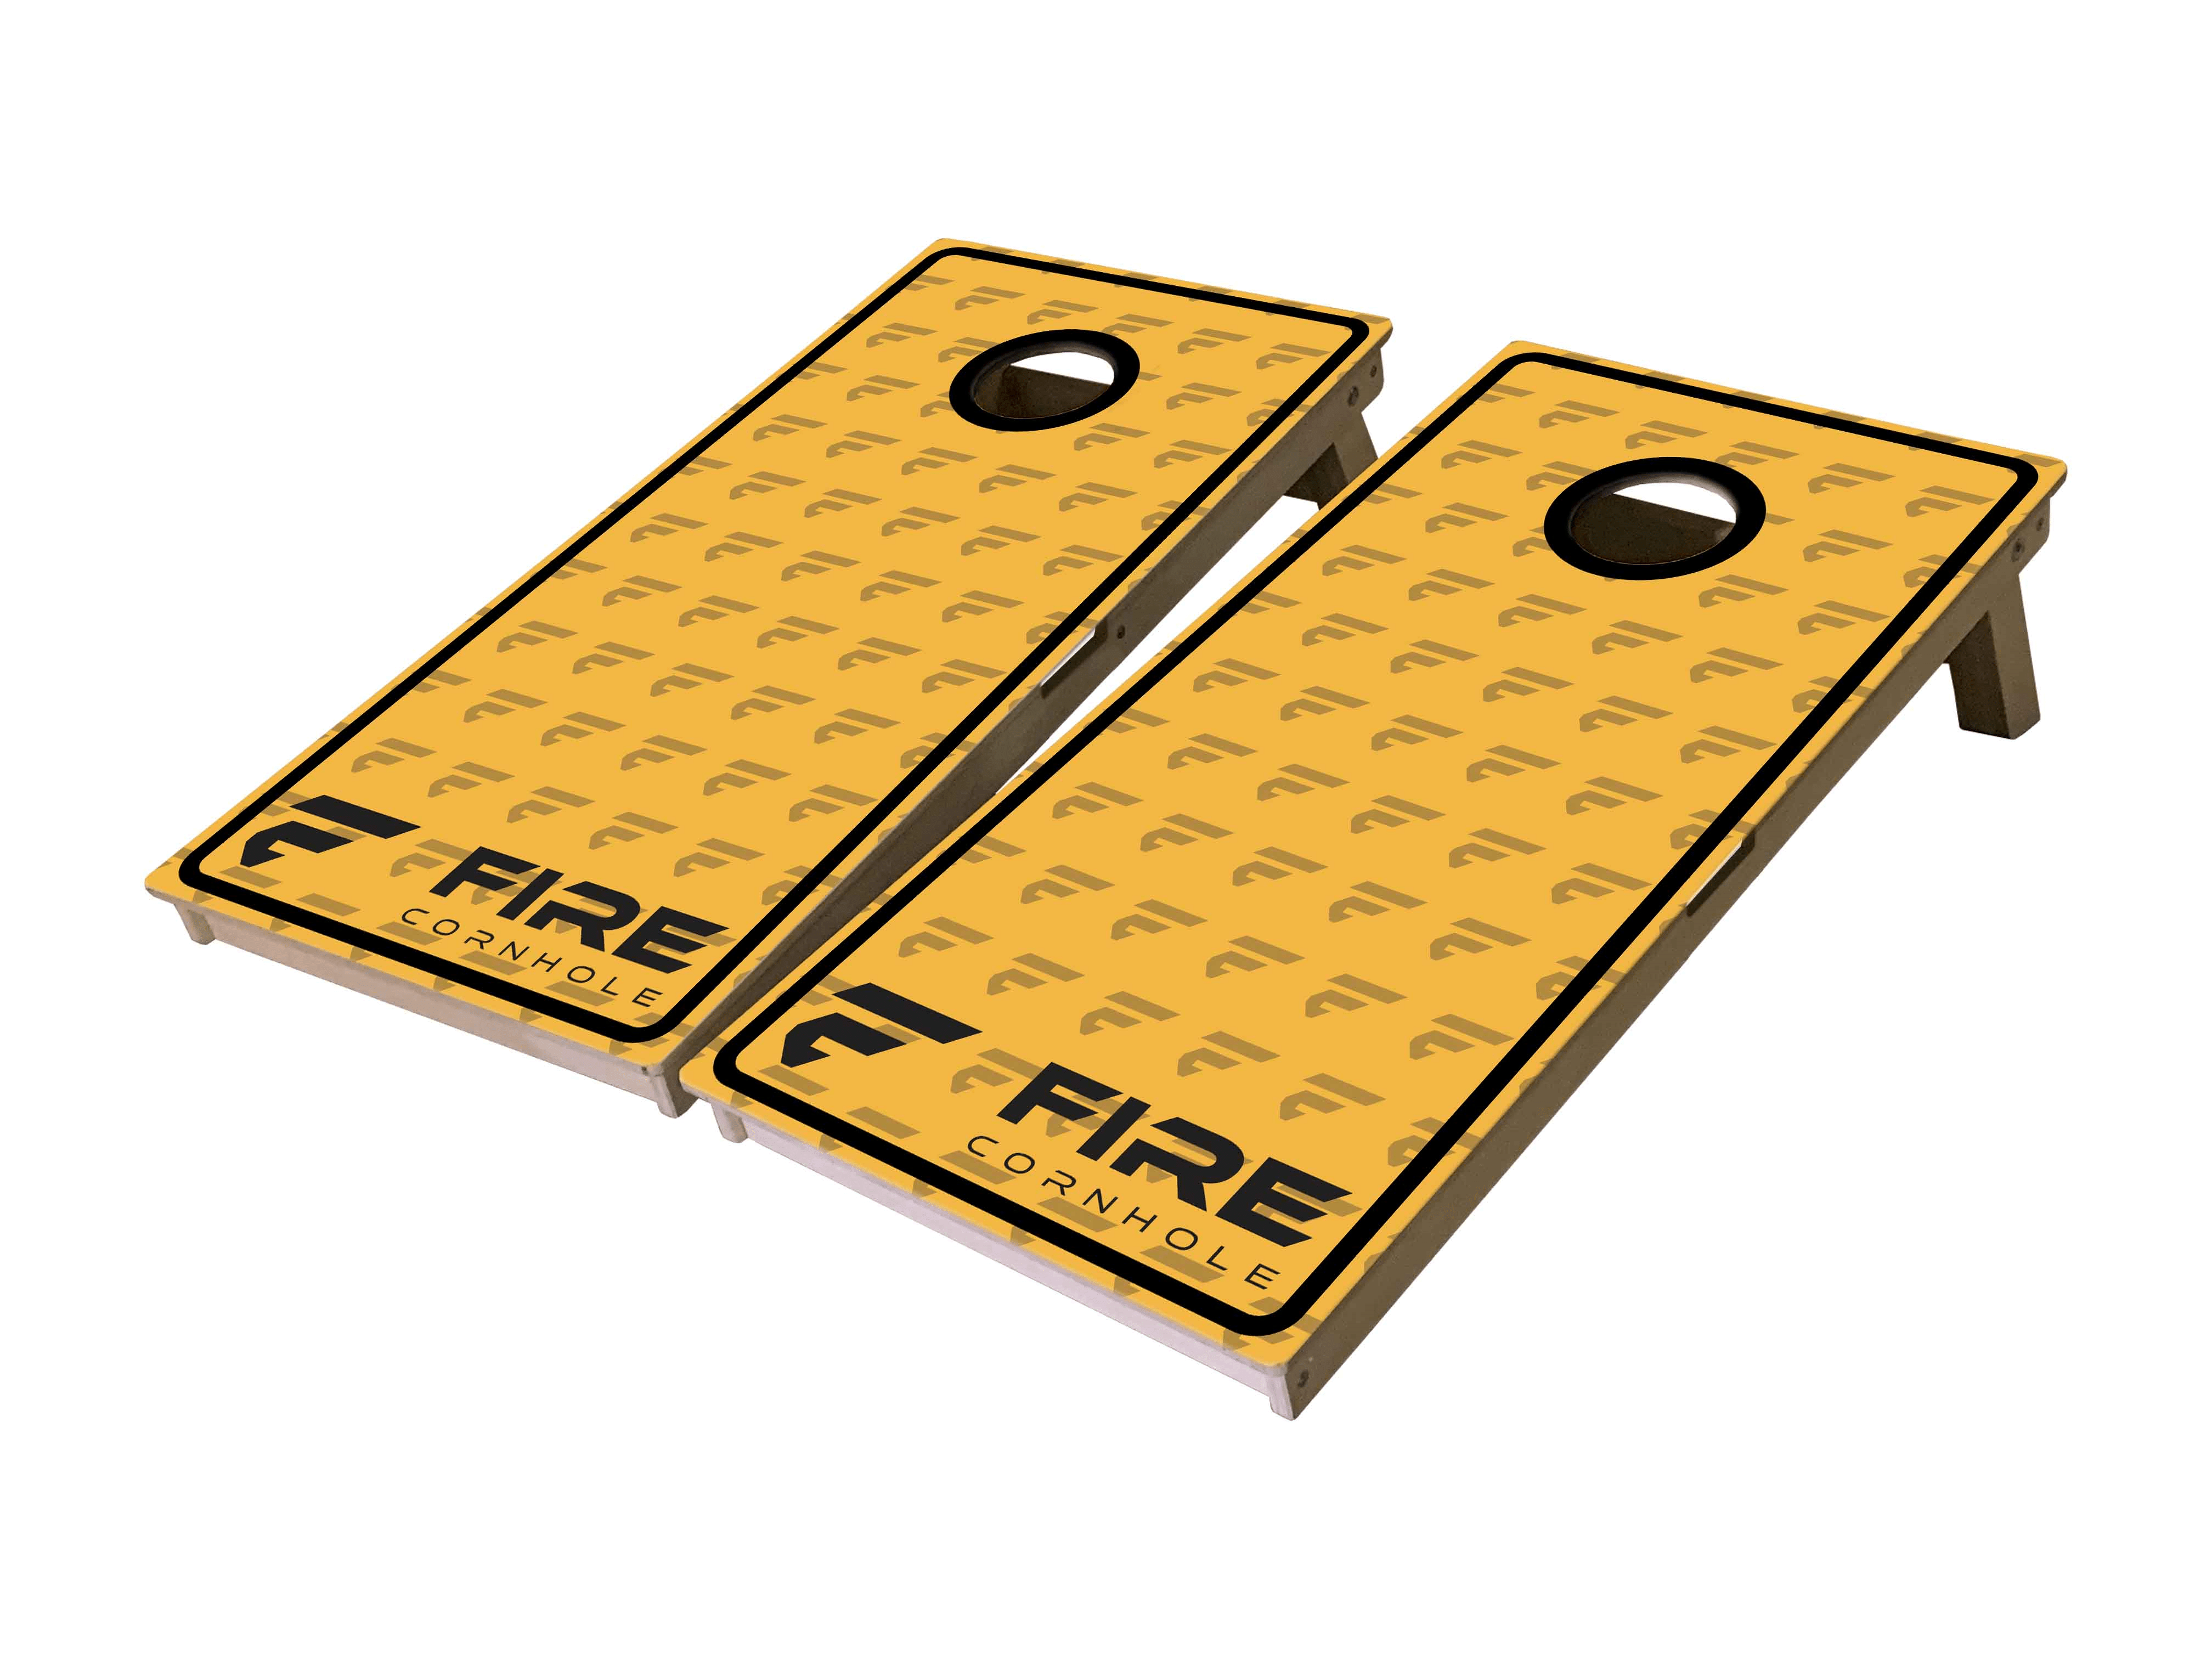 Fire Cornhole boards with "F" logo in yellow and black